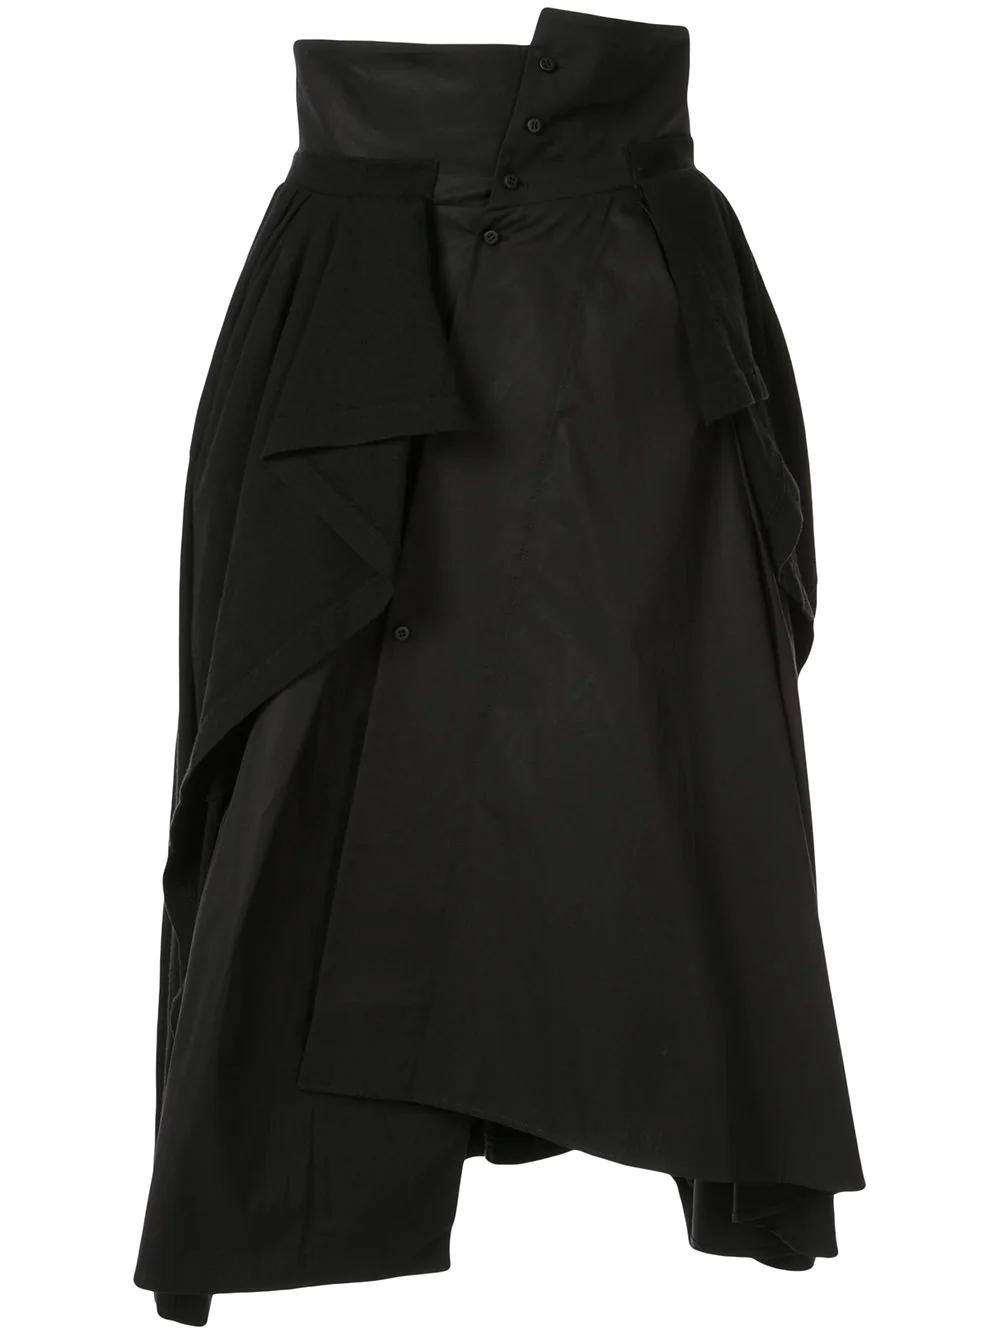 jersey-panelled asymmetric skirt by AGANOVICH